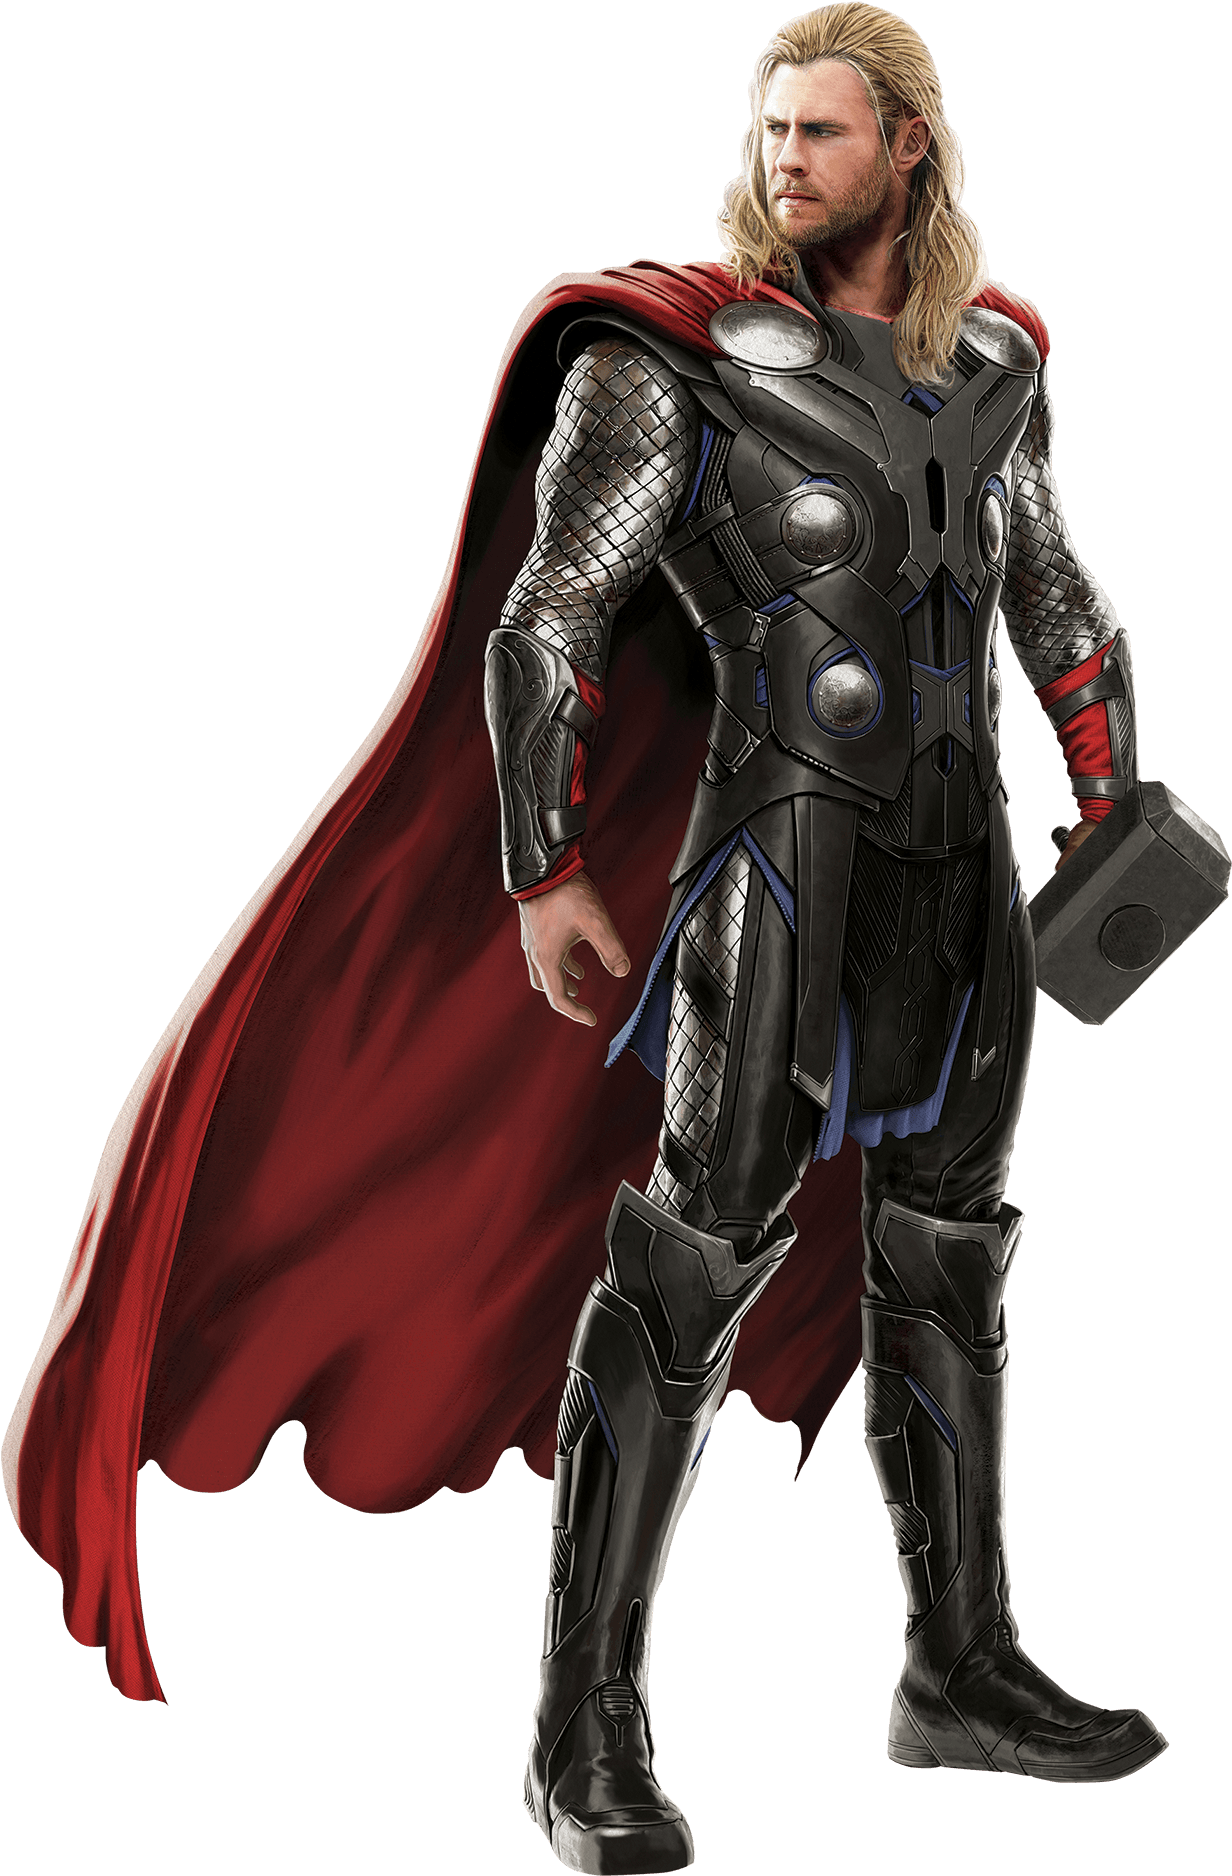 445-4459677_learn-more-about-your-mission-mcu-png-thor.png